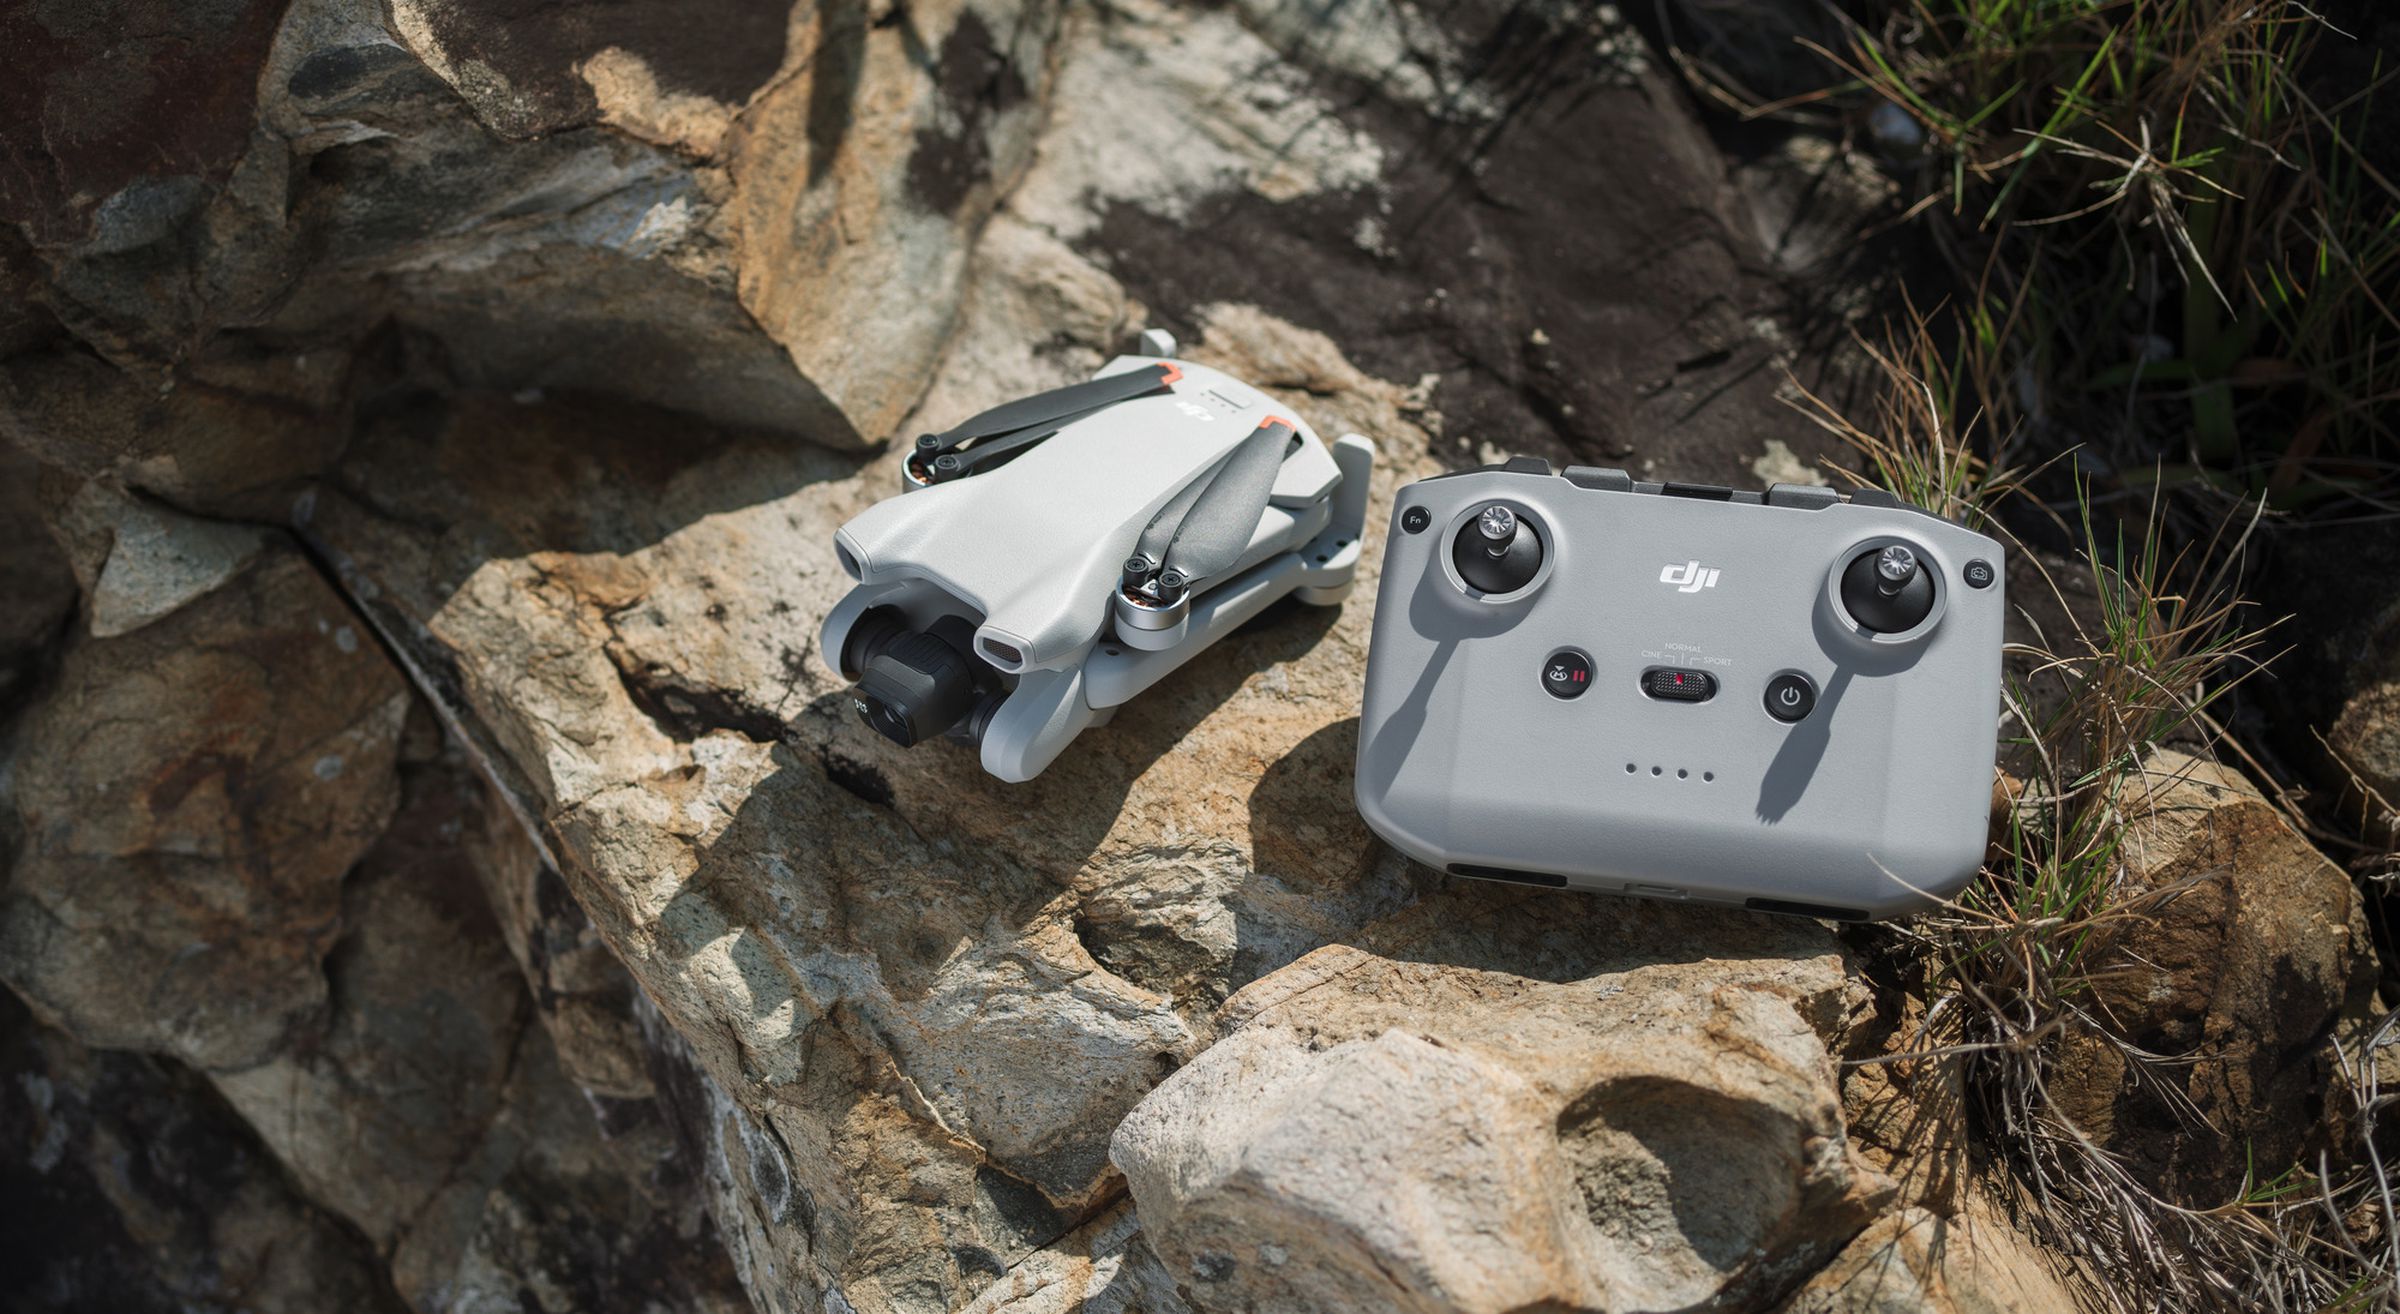 The DJI Mini 3 drone without the extended blades next to the DJI RC-N1 controller.  Both products rest on a large rock in an outdoor setting.